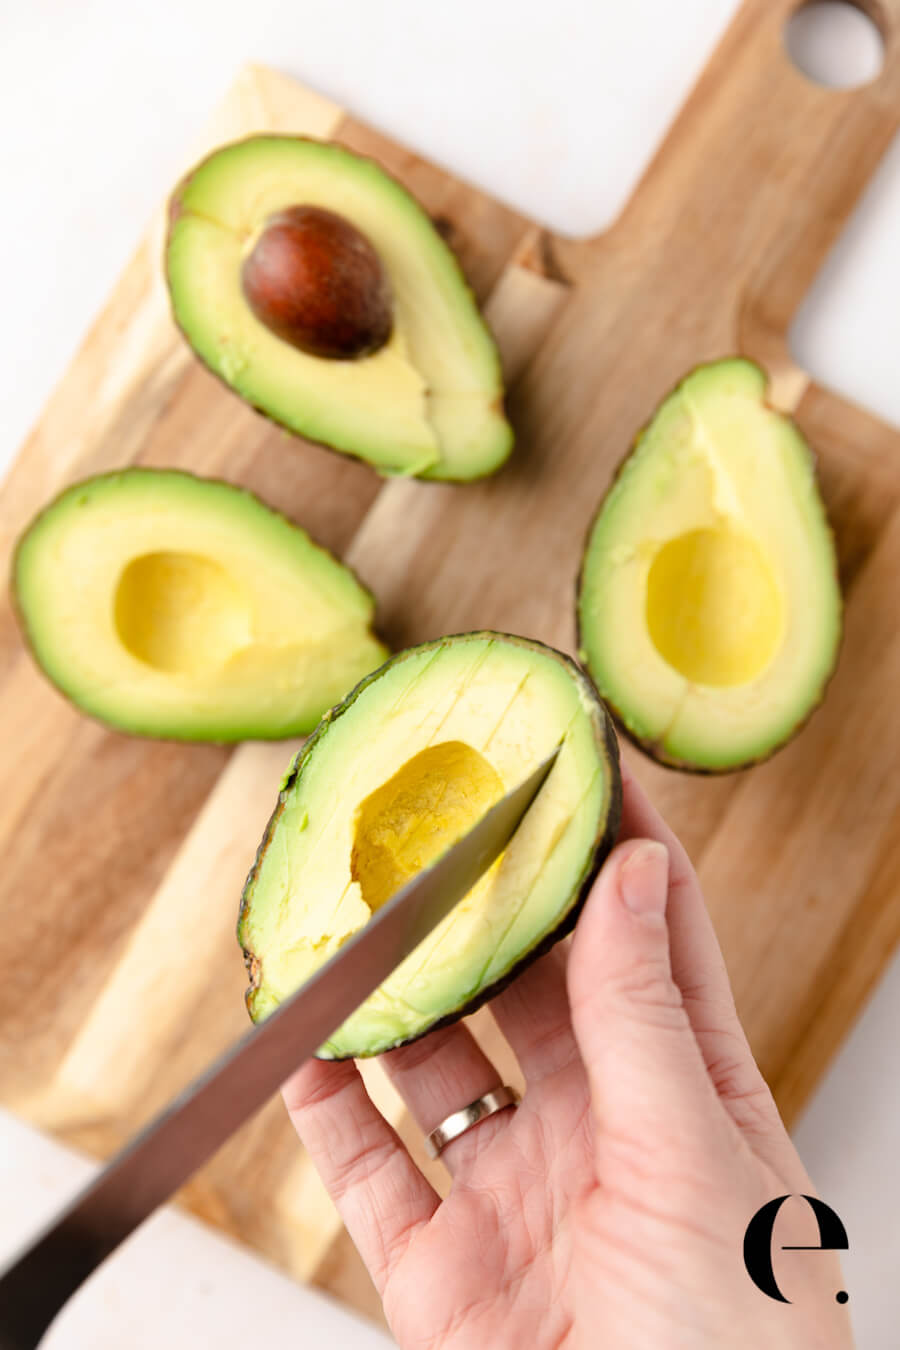 slicing an avocado with a knife